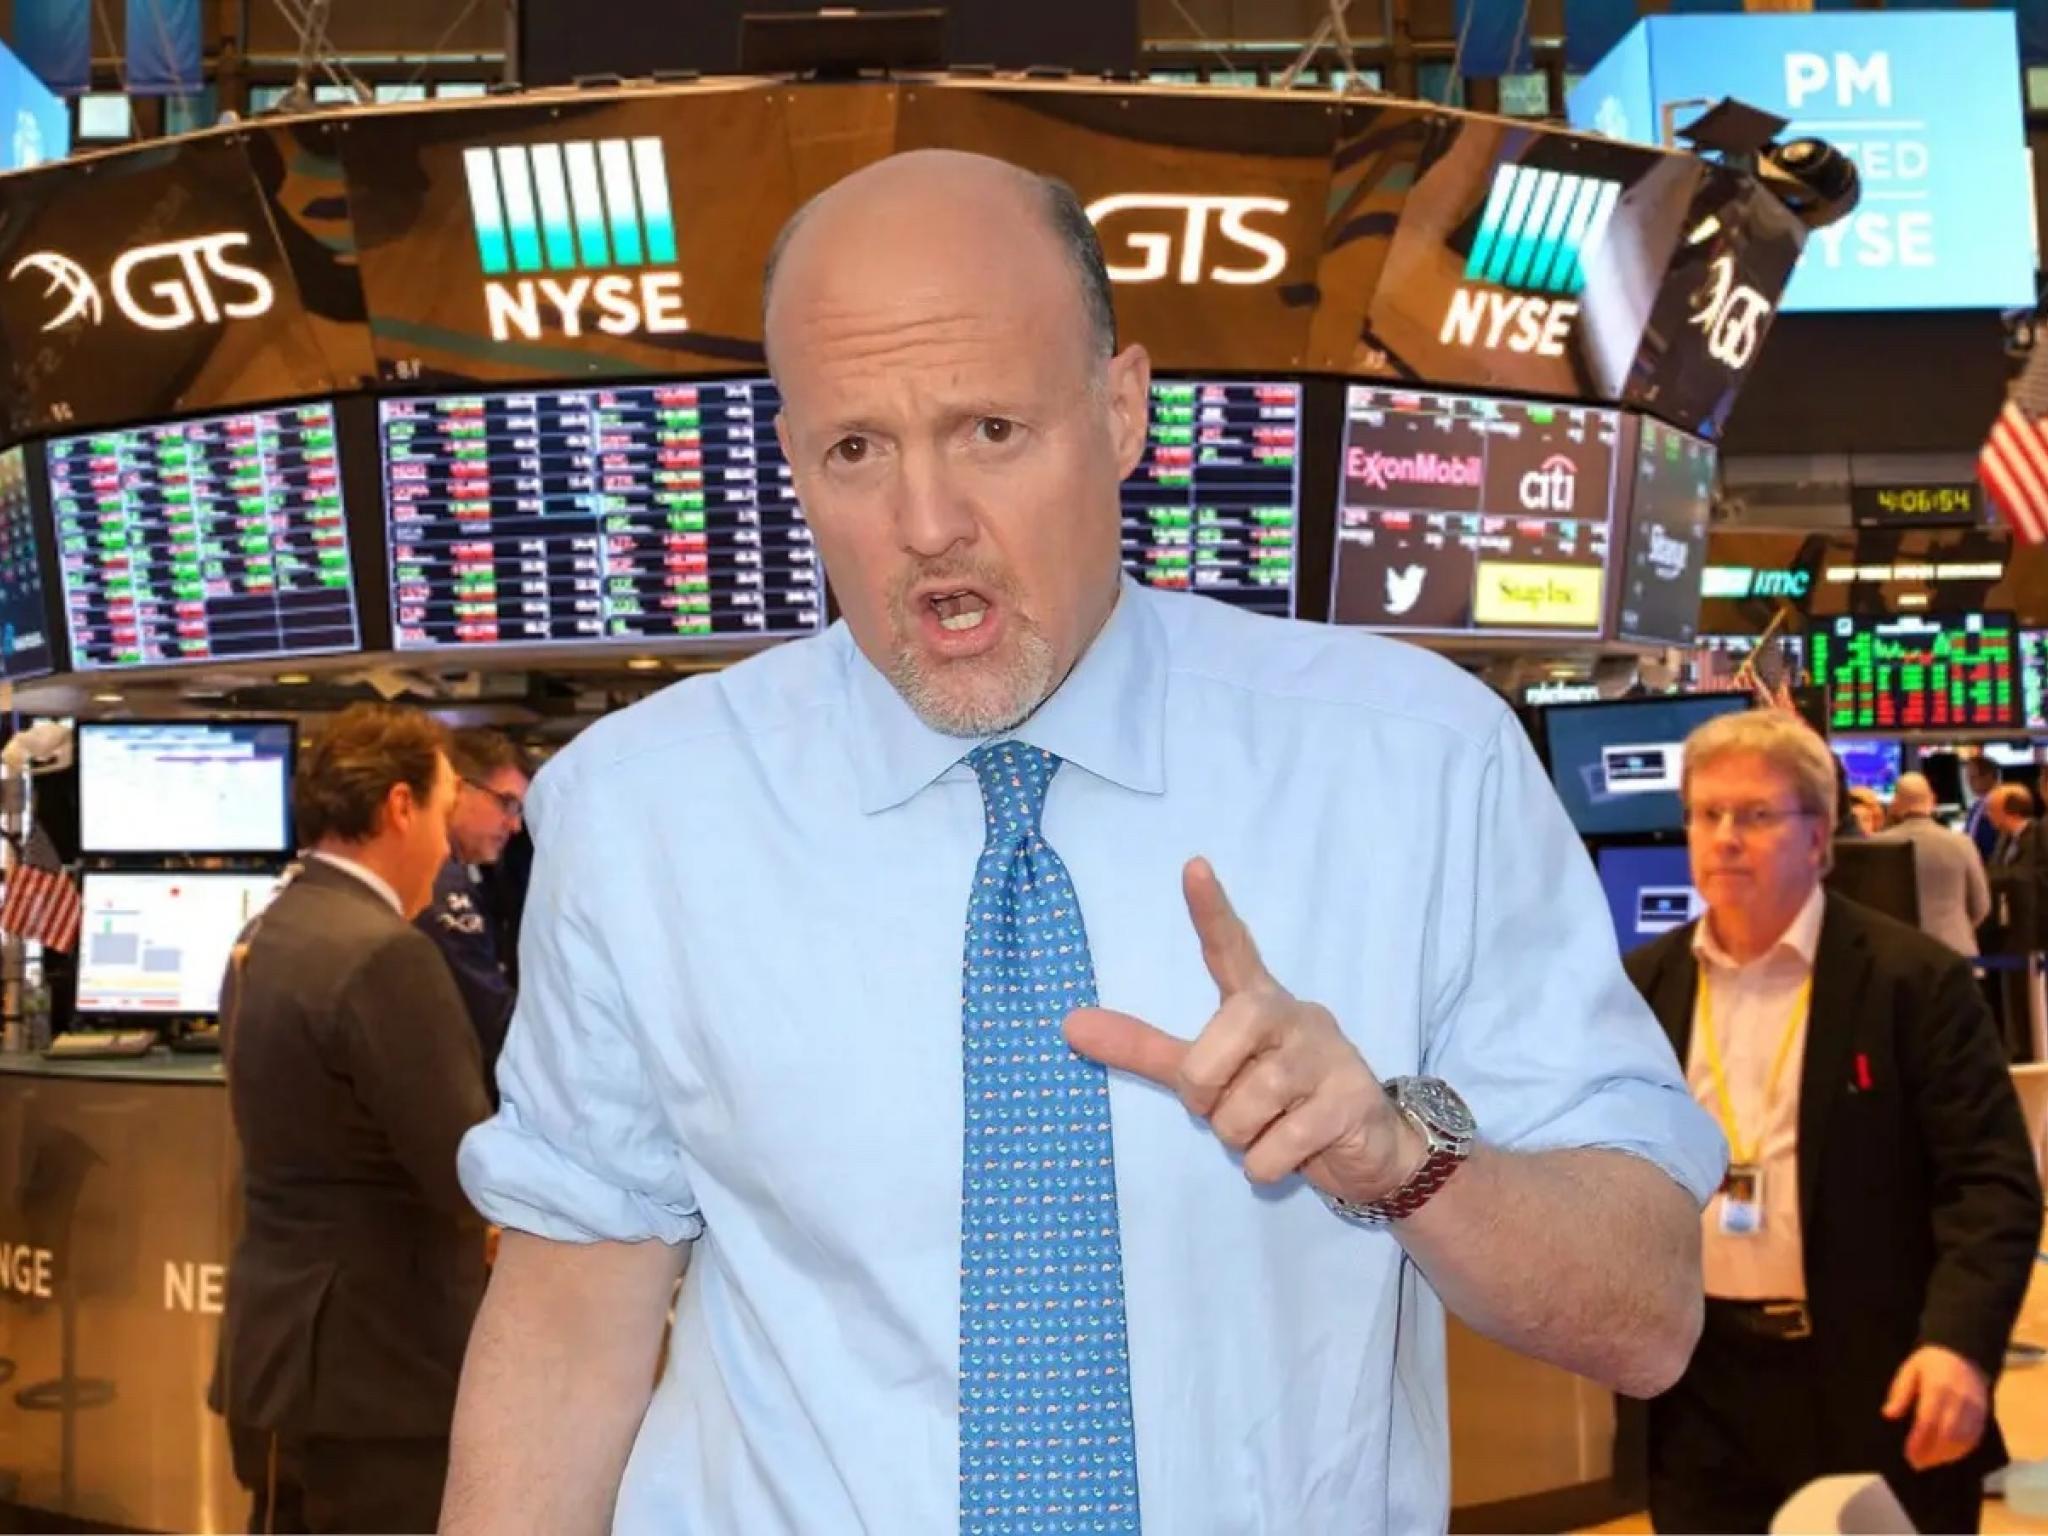  wait-for-a-pullback-jim-cramer-on-this-materials-stock-up-35-over-past-month 